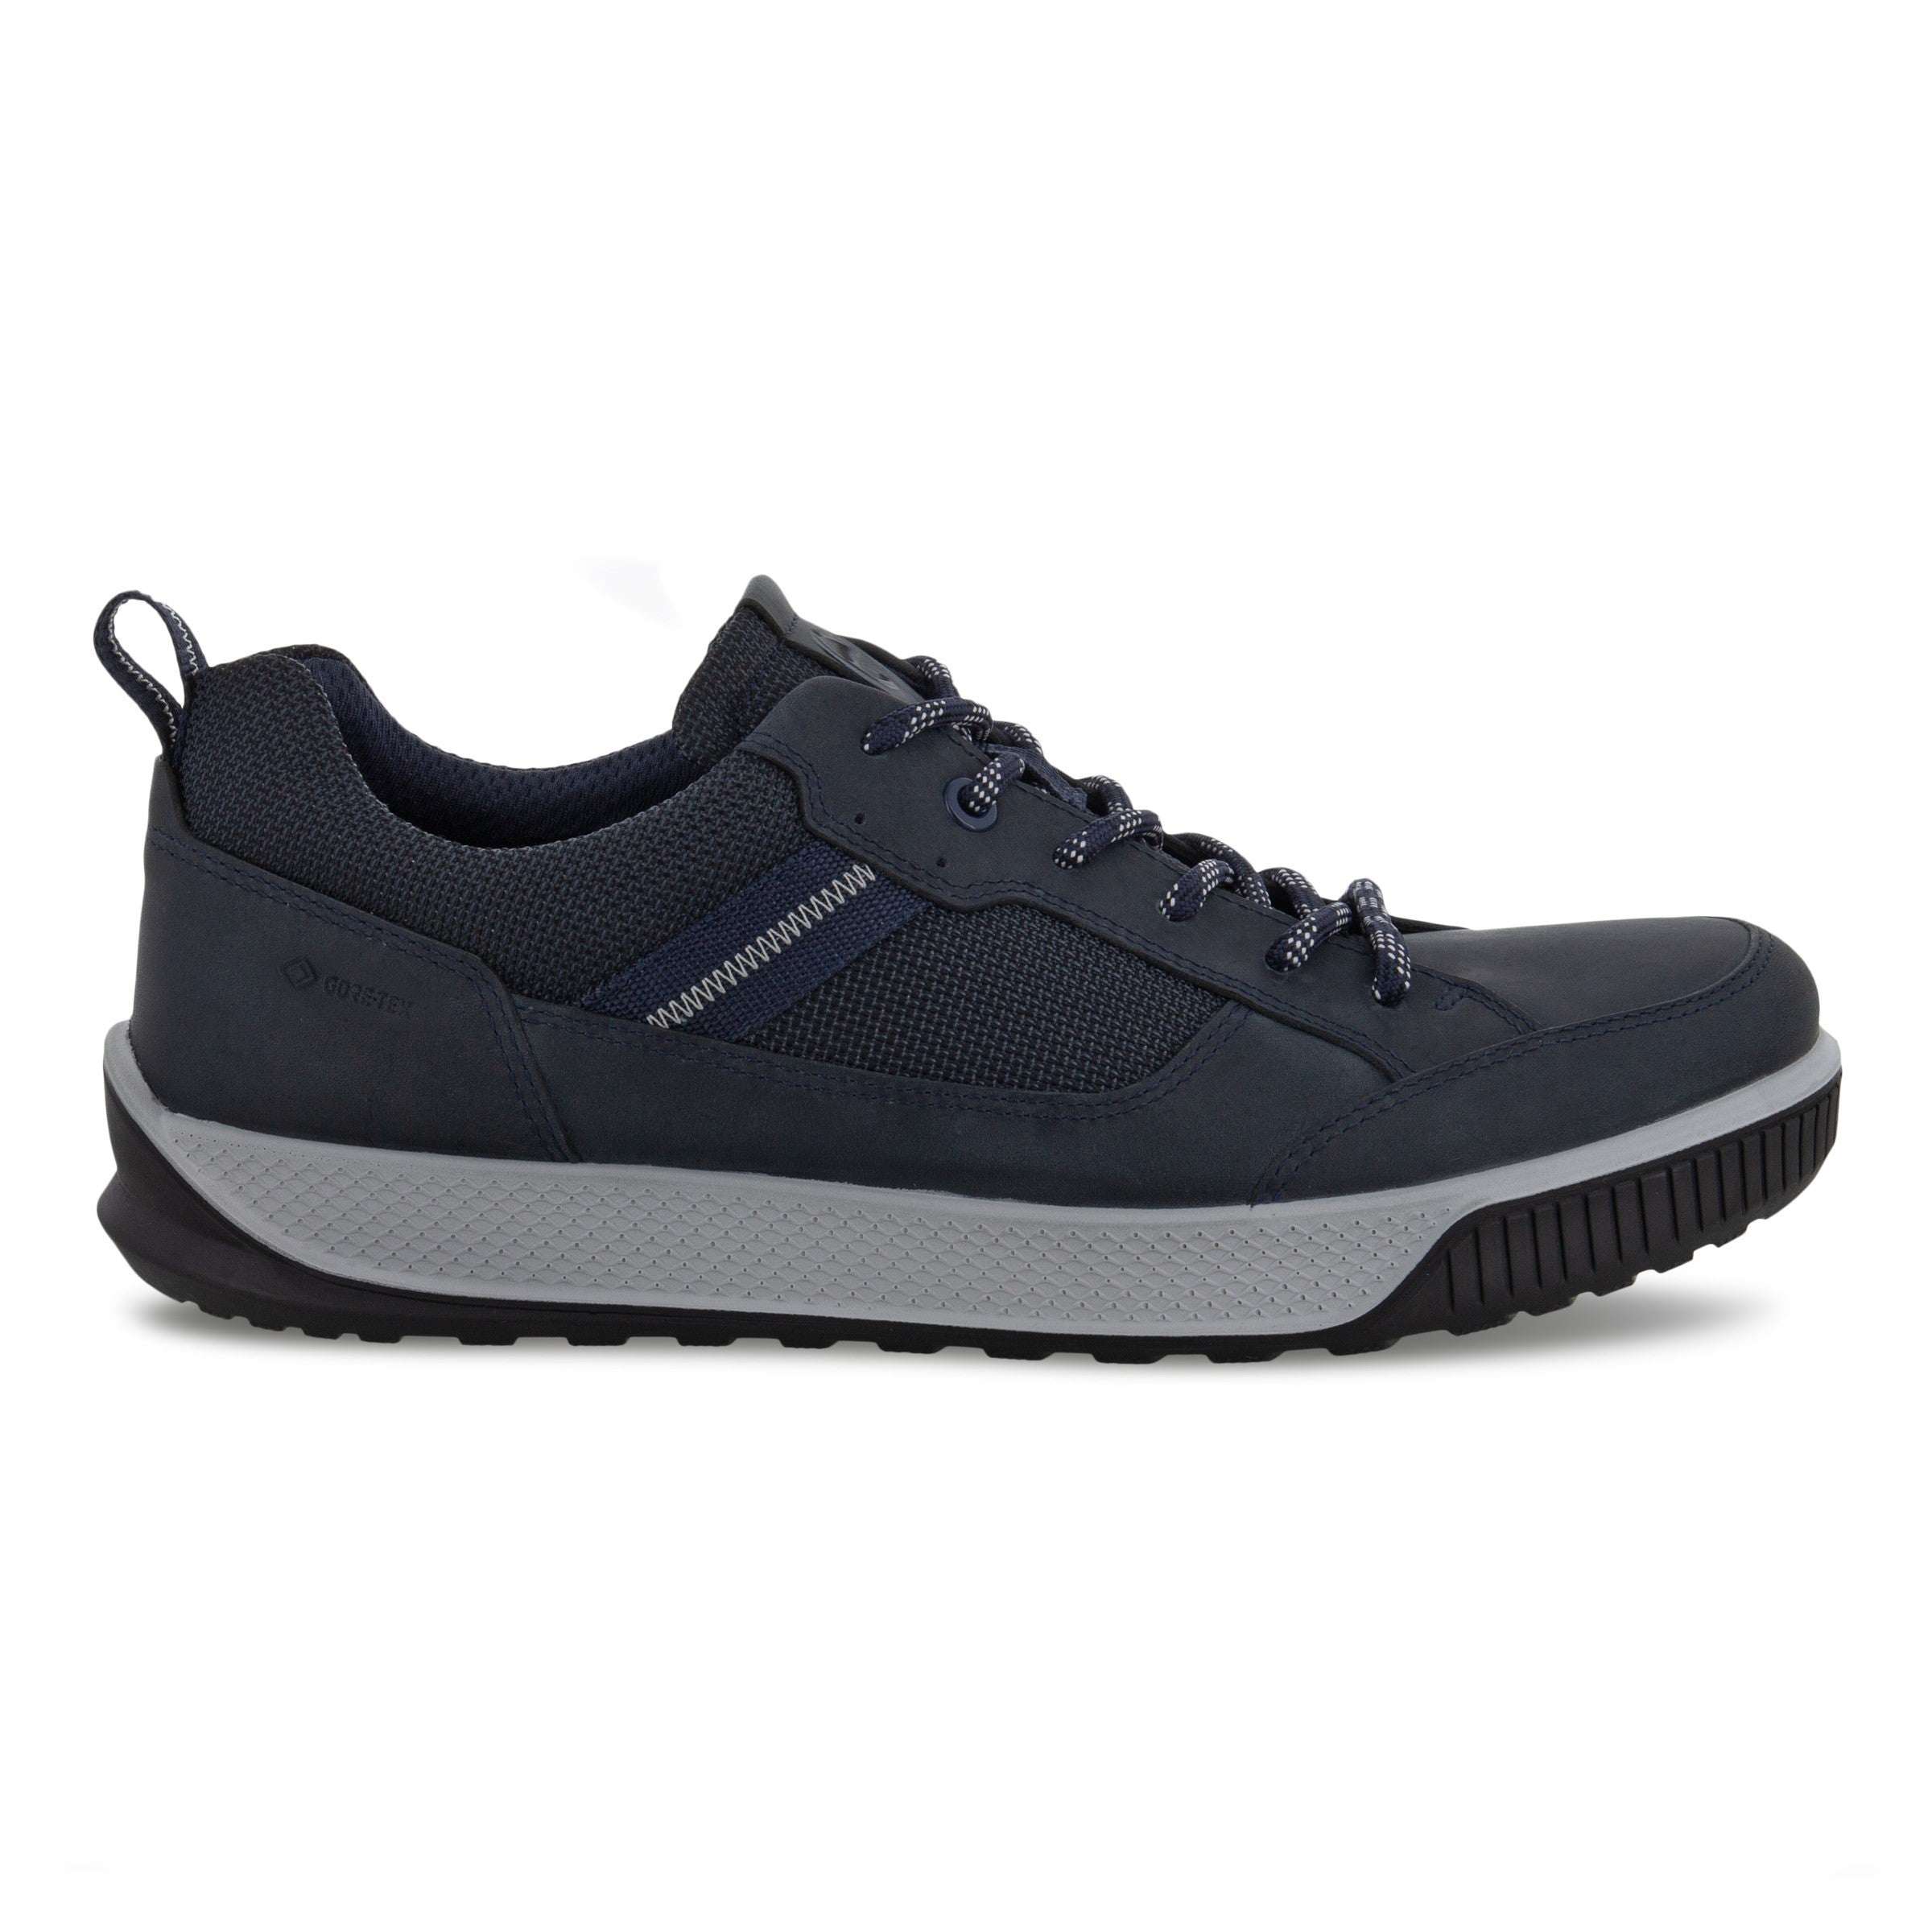 Ecco Byway Tred 501874 50595 Mens Marine Blue Nubuck Waterproof Arch Support Lace Up Shoes